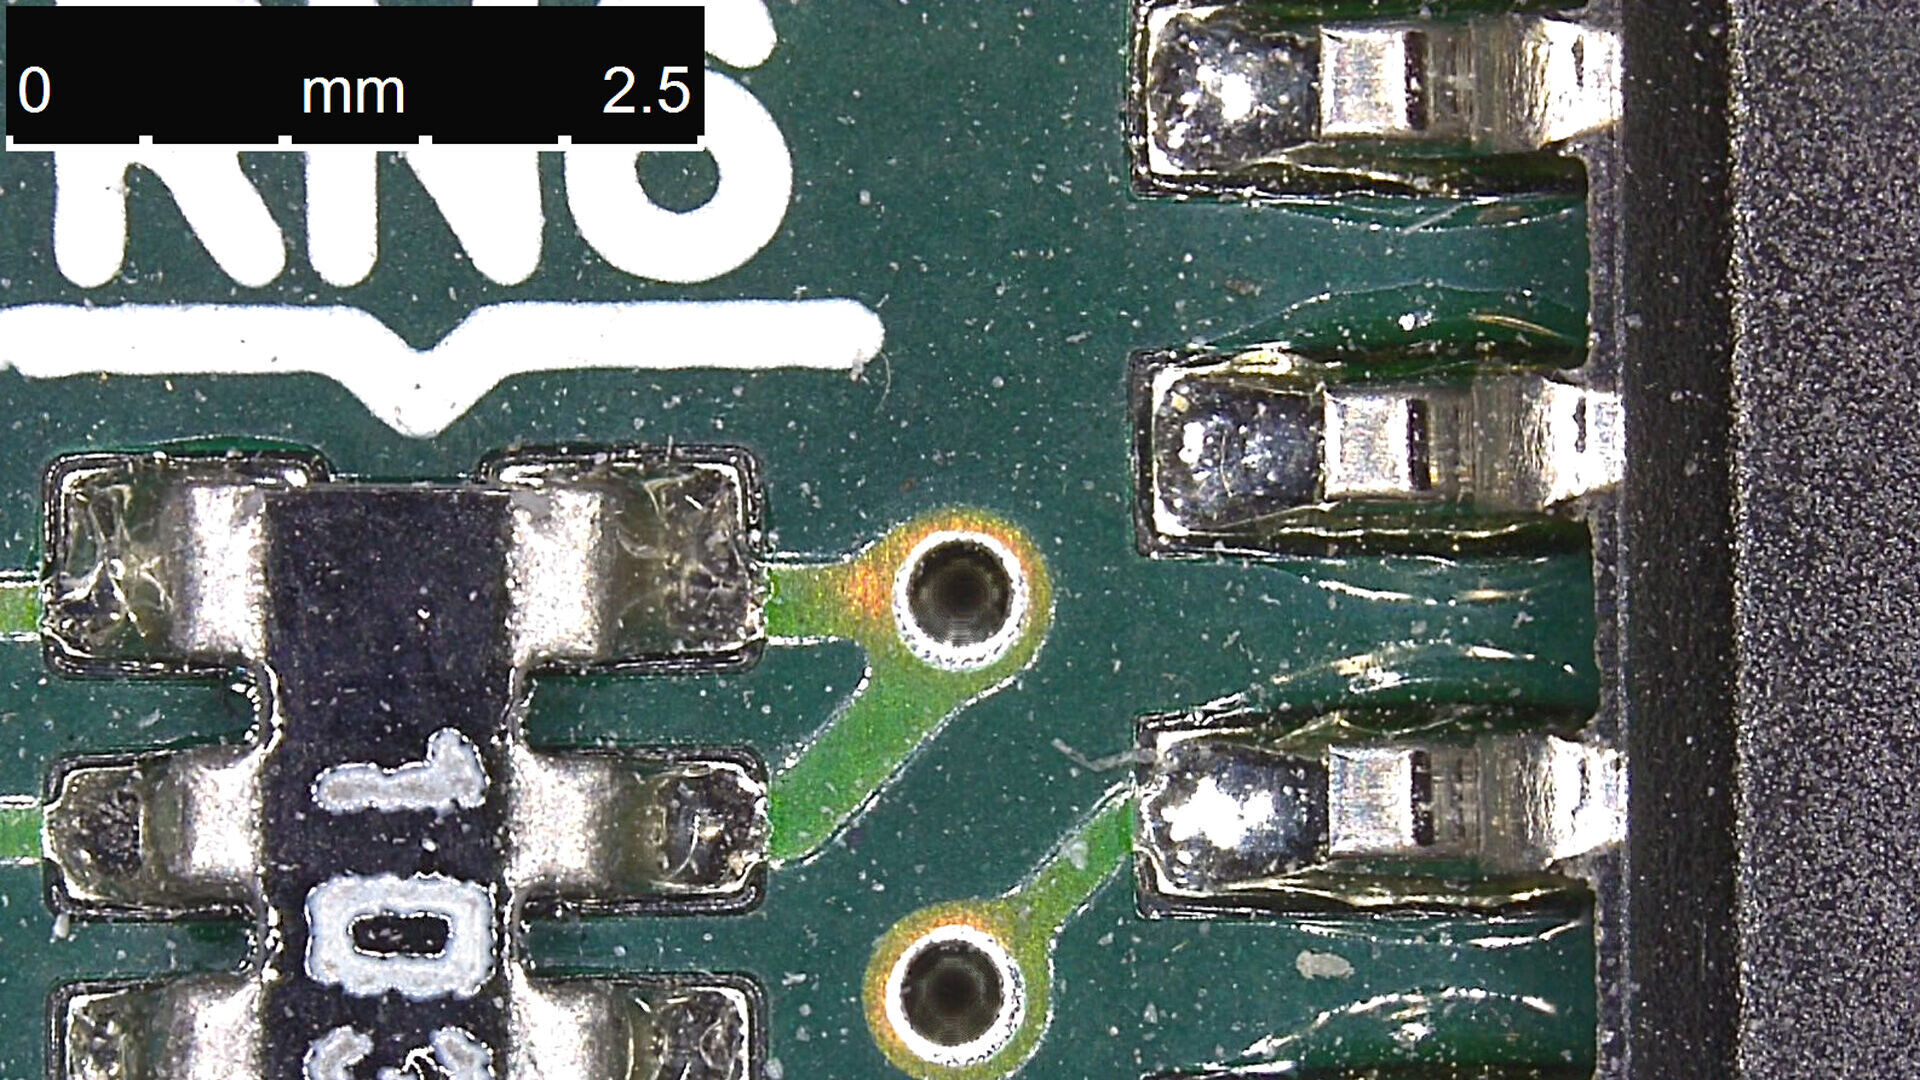 Glare from reflective surfaces can obscure PCB inspection. Here a PCB area is inspected with the DVM6 digital microscope using ring light illumination only